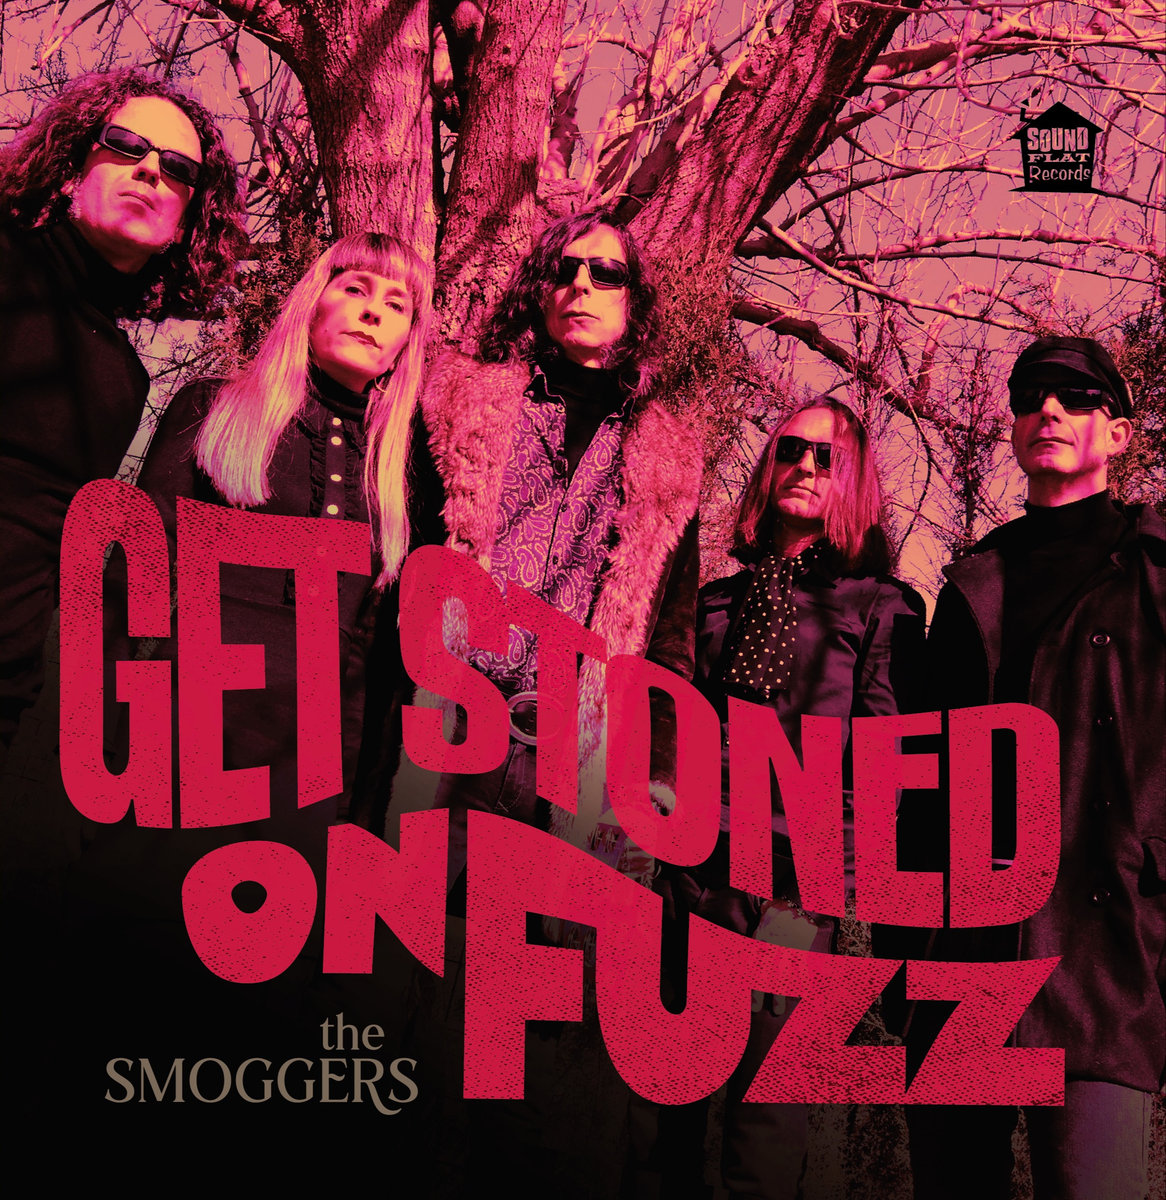 The Smoggers - Get stoned on fuzz (2019)